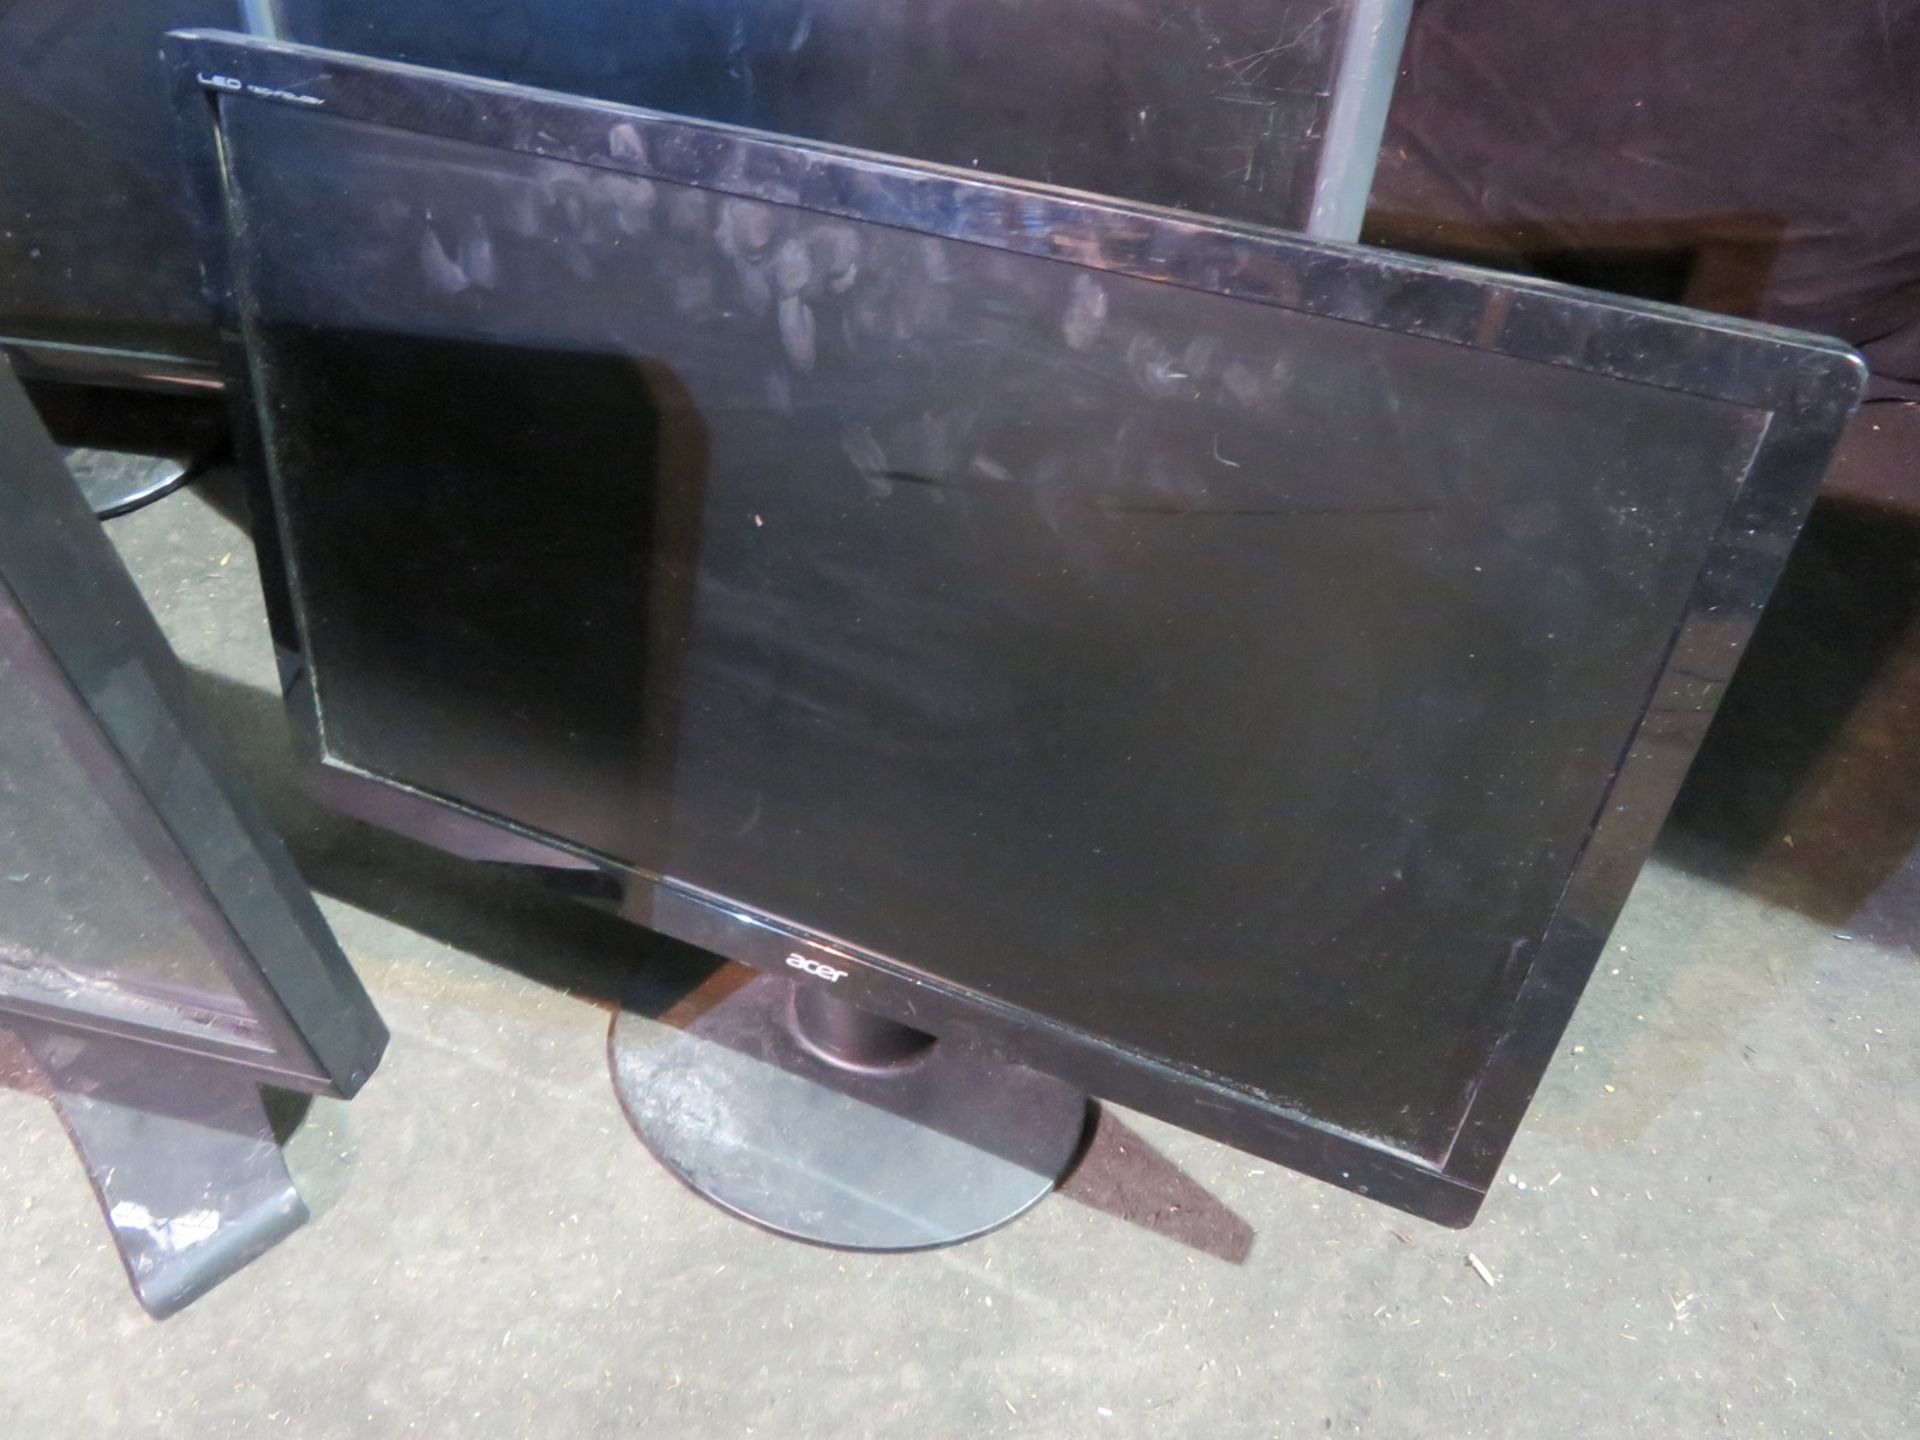 6 x LCD computer monitors of various makes and sizes. Including Dell, Acer and Iiyama. - Image 4 of 7